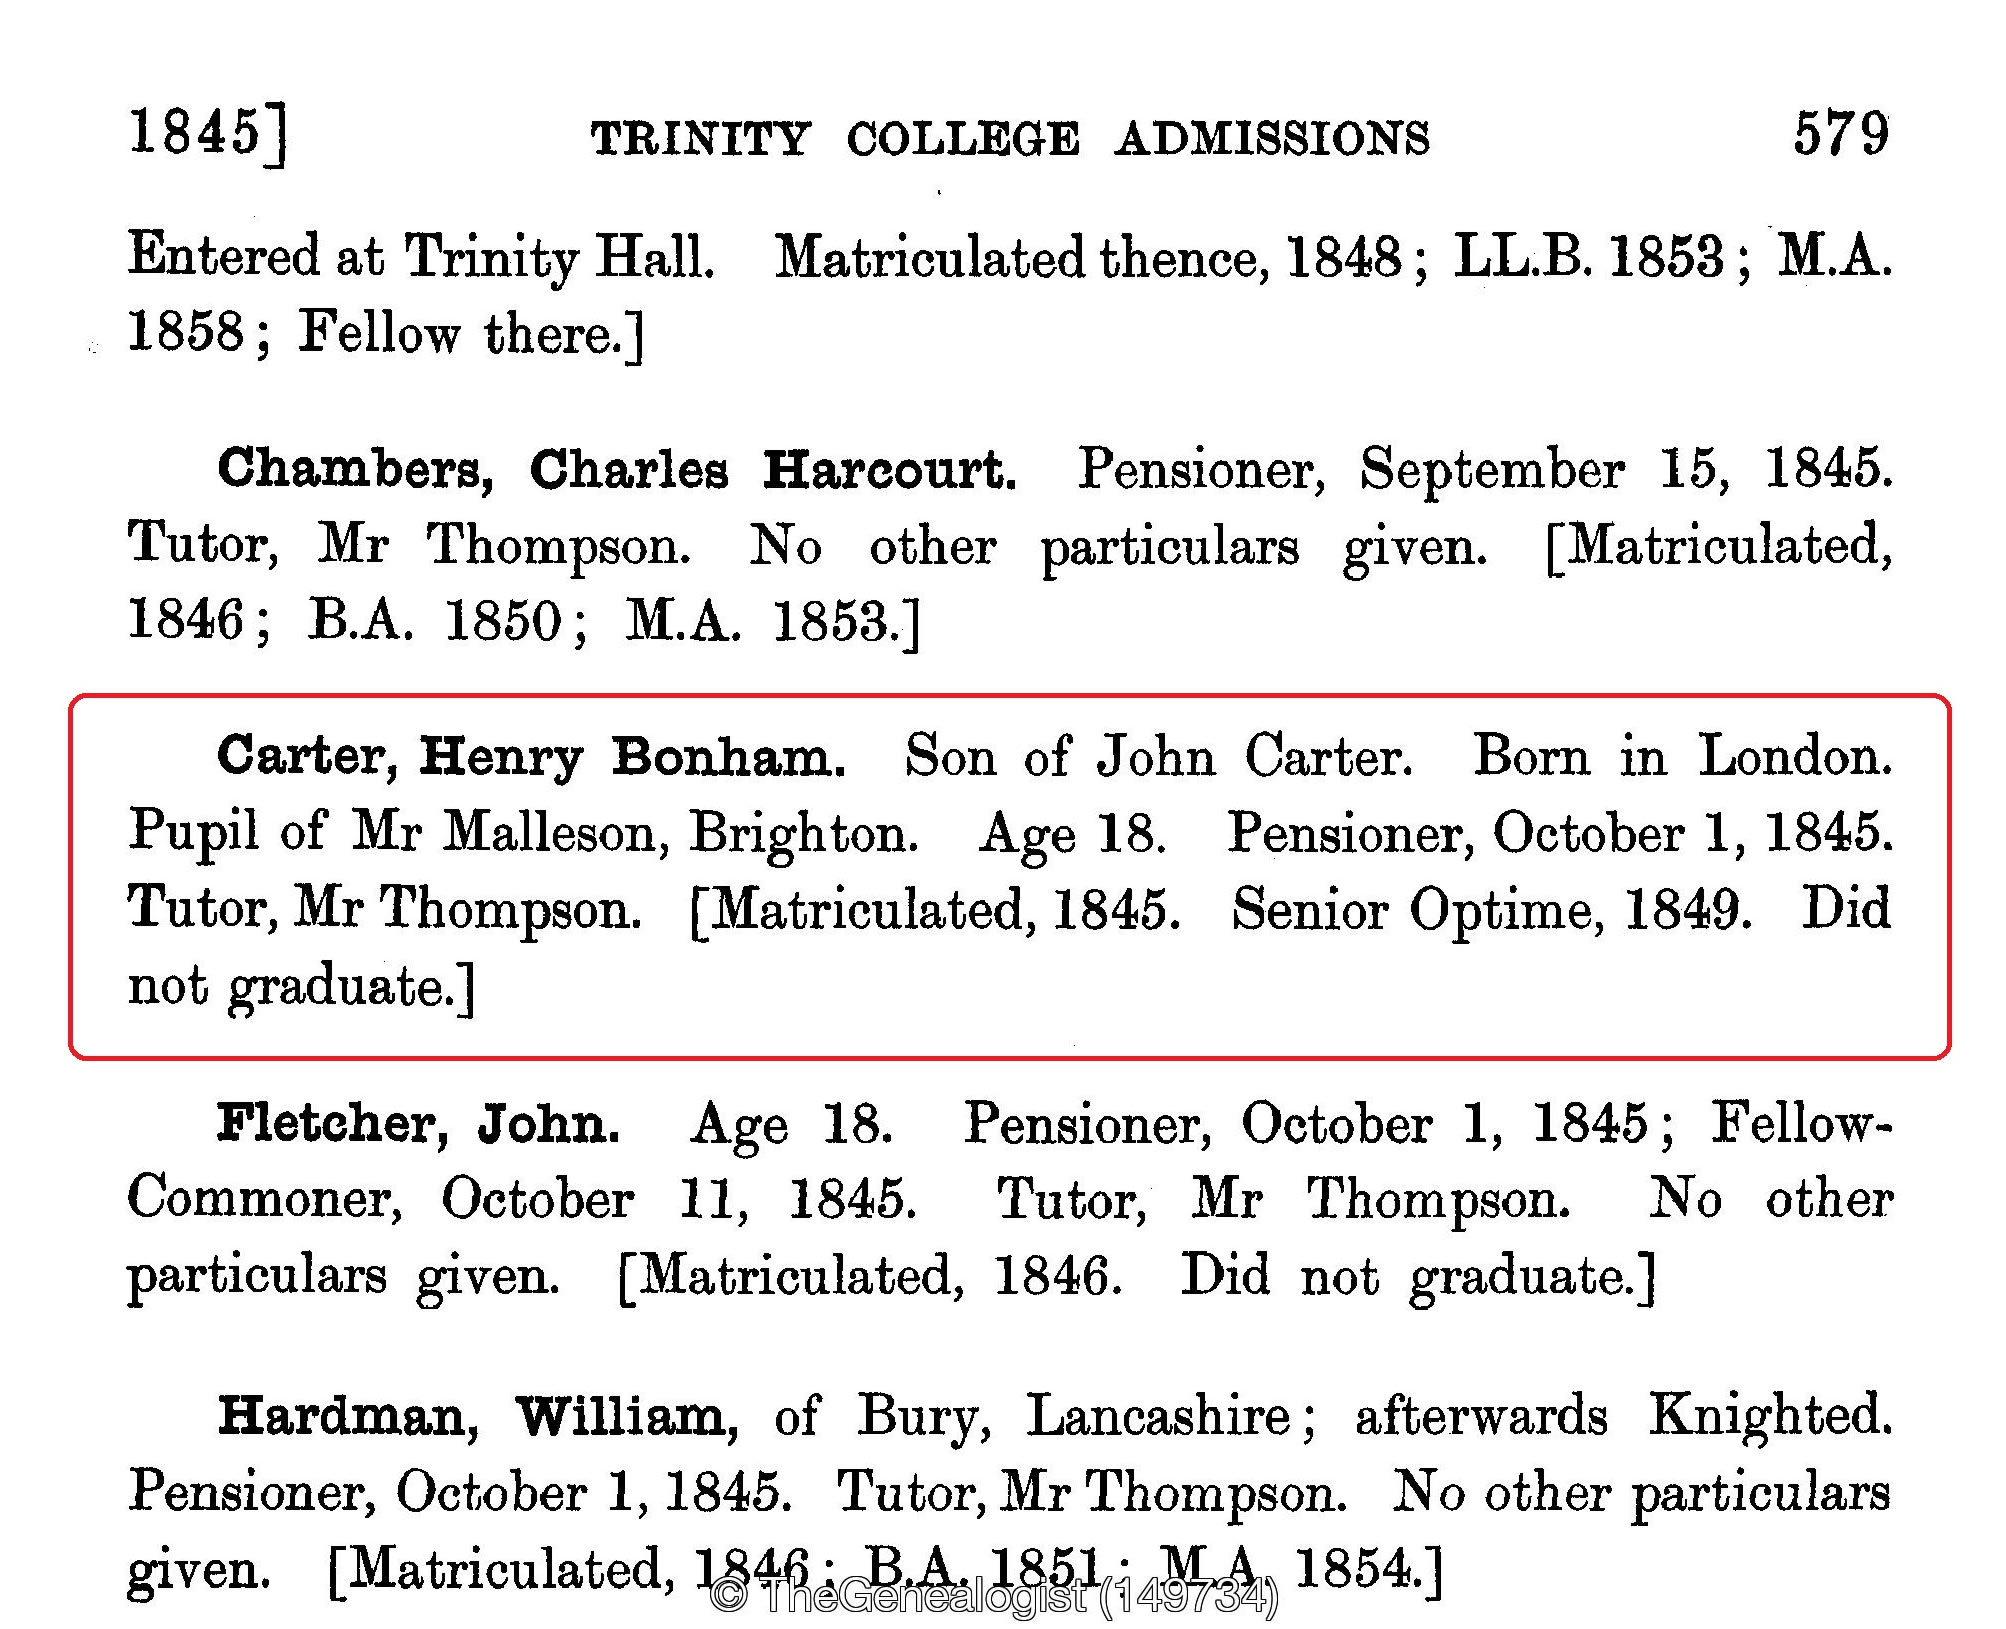 Education Records on TheGenealogist with Henry Bonham Carter's entry in Trinity College Cambridge Admissions